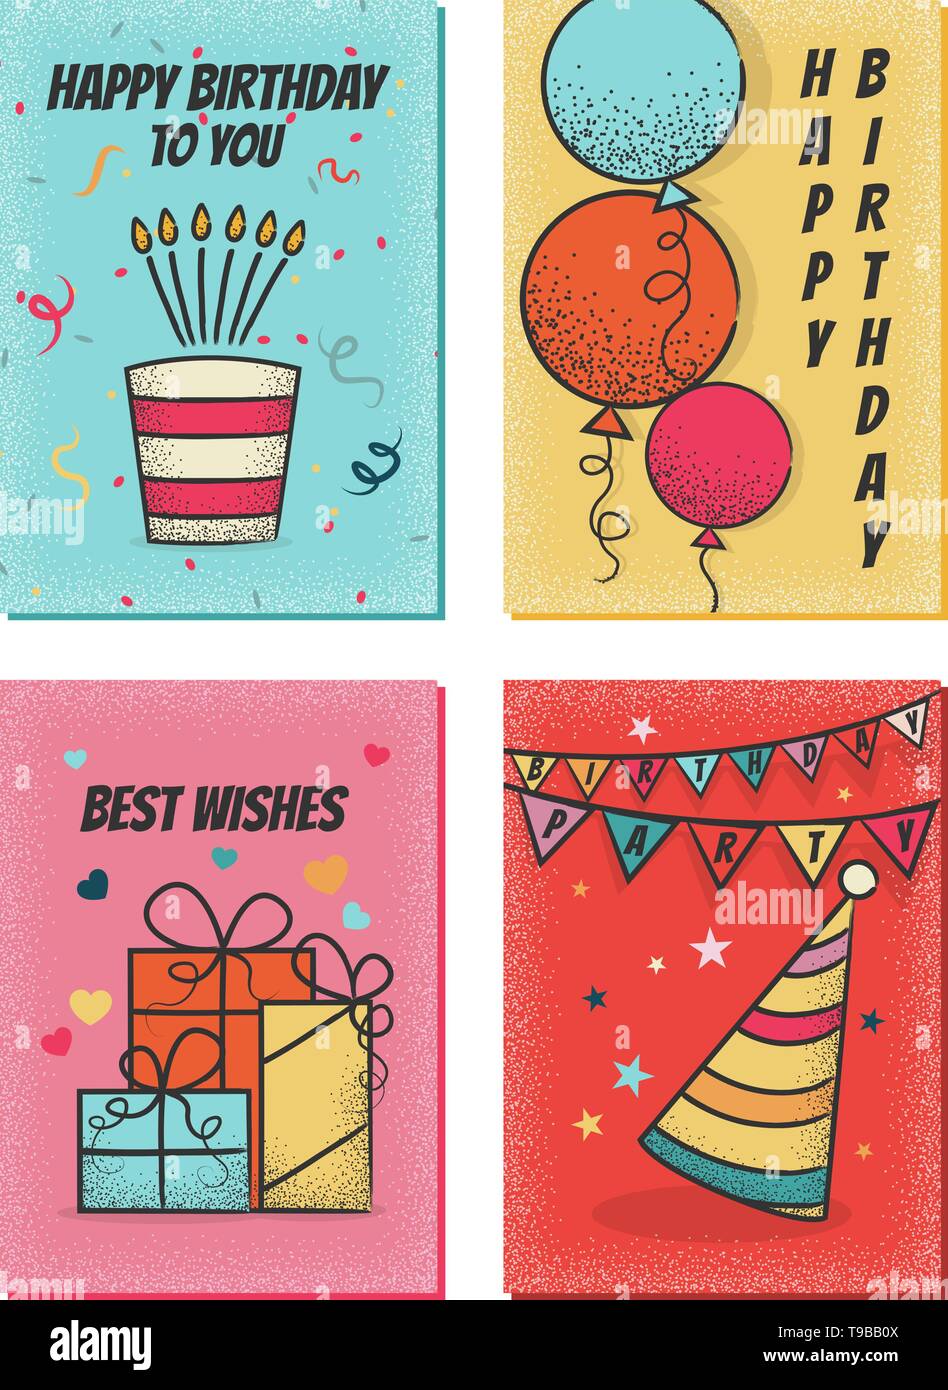 Happy birthday cards template set on white background isolated Stock Vector